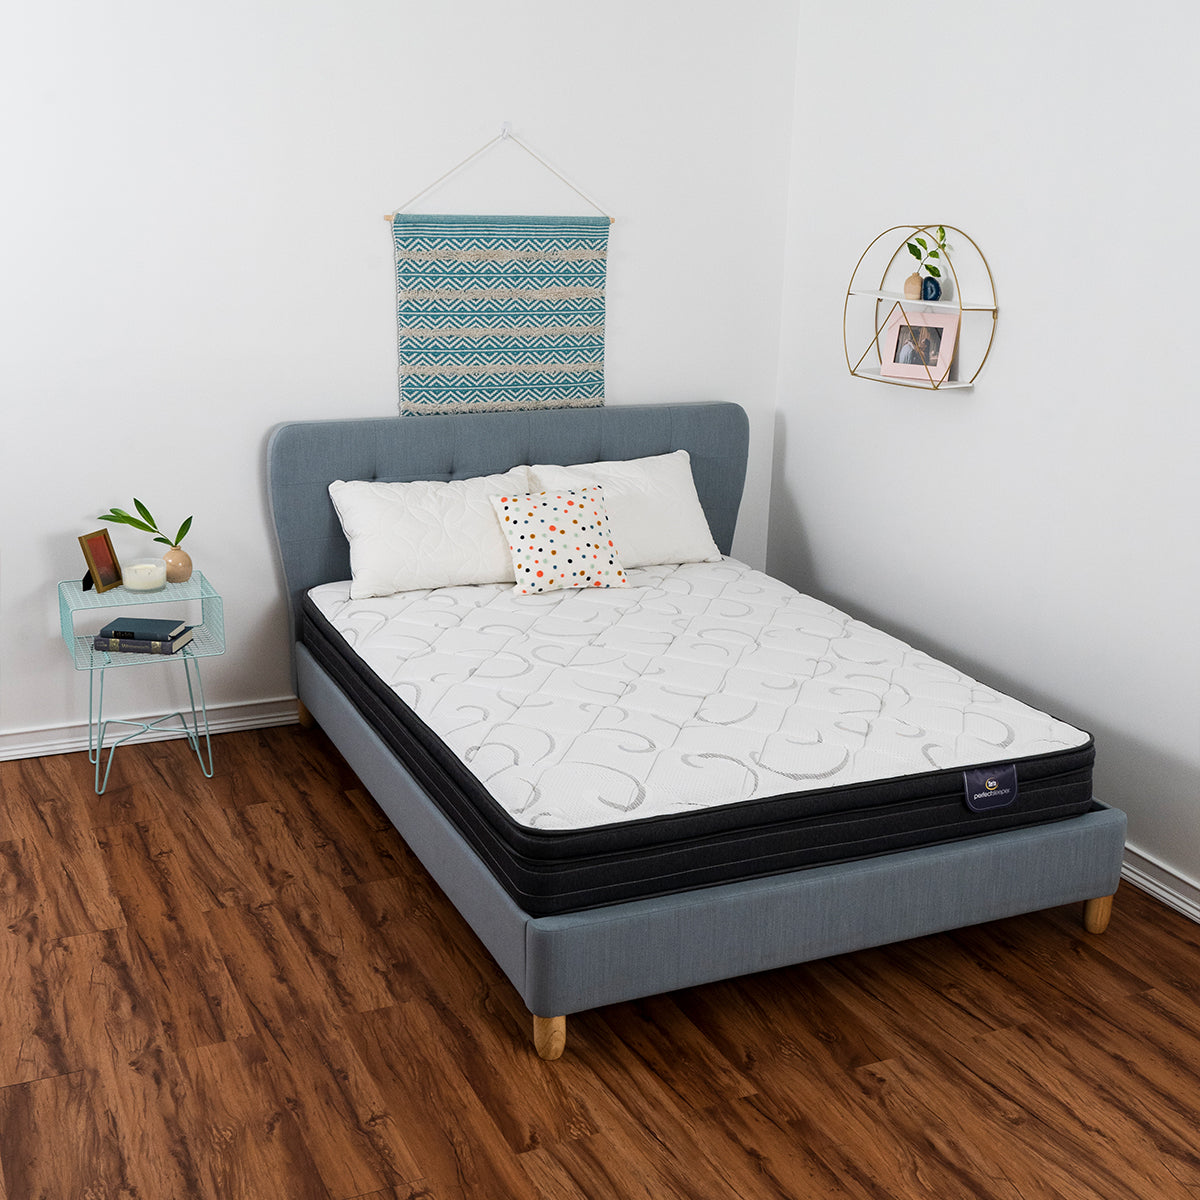 Serta Perfect Sleeper® Seabright Euro Top Mattress With Pillows On Bed Frame Overhead View Showing Swirled Pattern Of The Cover Fabric